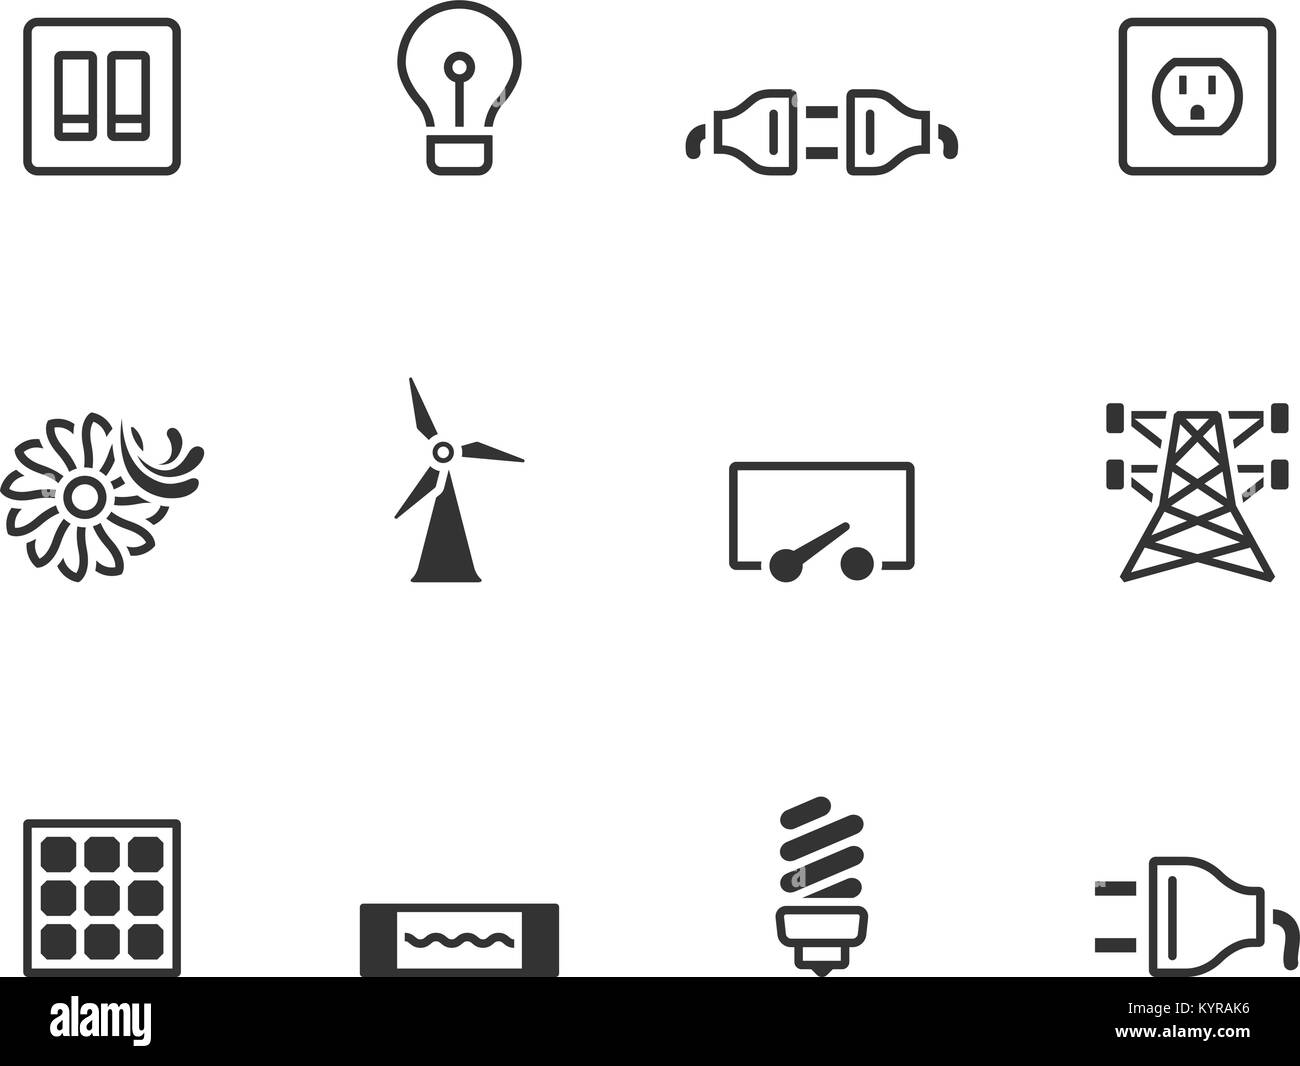 Electricity icons in single colors. Vector illustration. Stock Vector